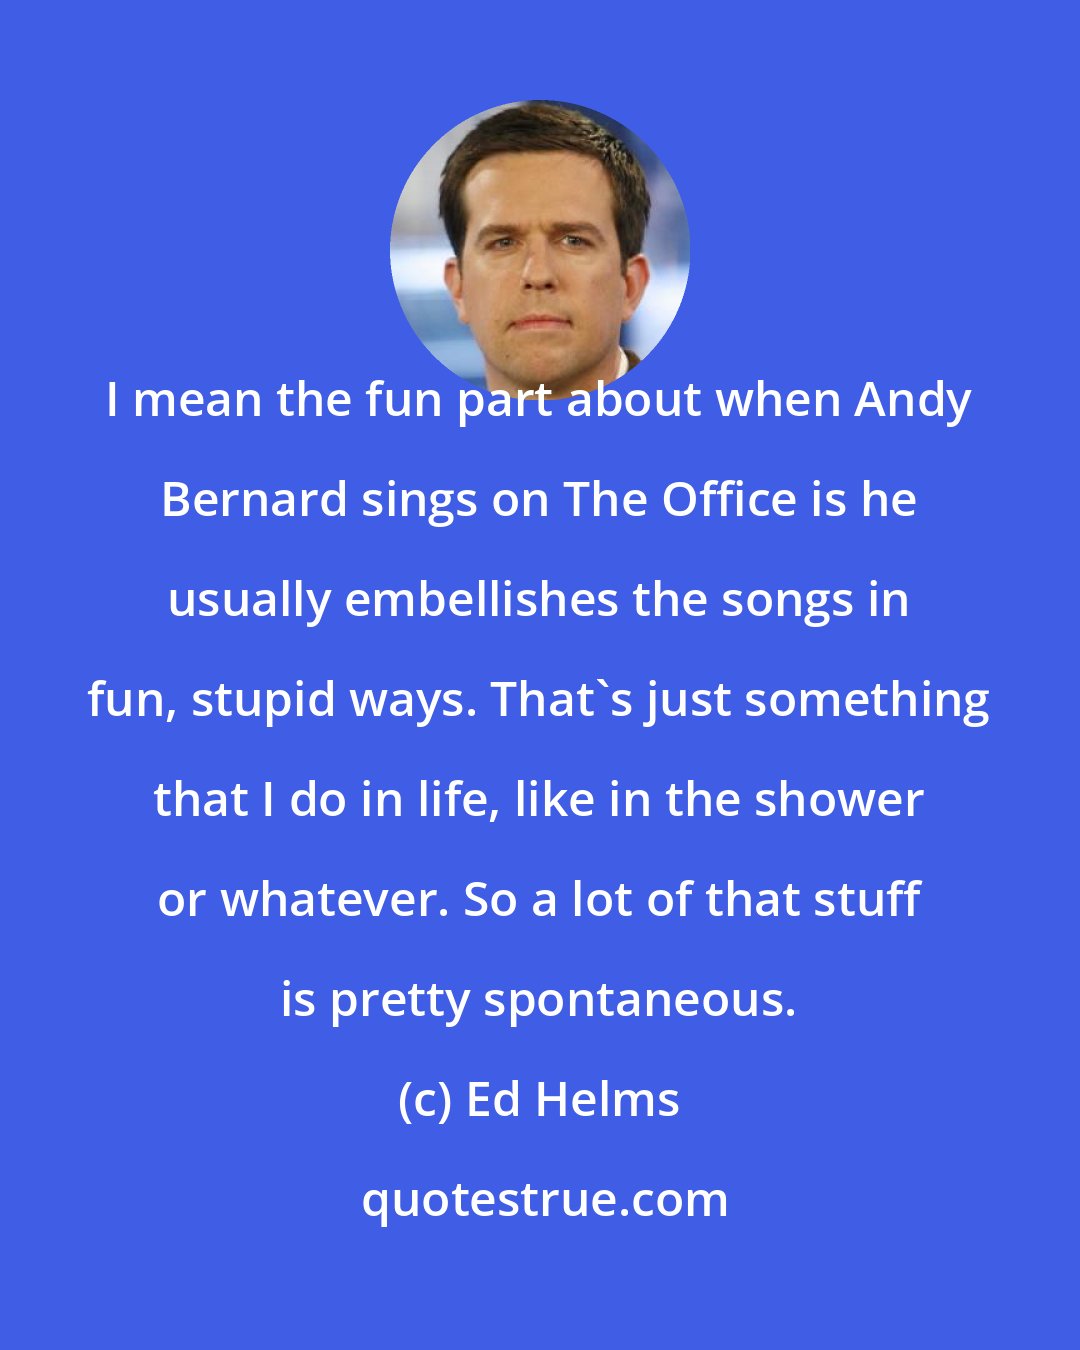 Ed Helms: I mean the fun part about when Andy Bernard sings on The Office is he usually embellishes the songs in fun, stupid ways. That's just something that I do in life, like in the shower or whatever. So a lot of that stuff is pretty spontaneous.